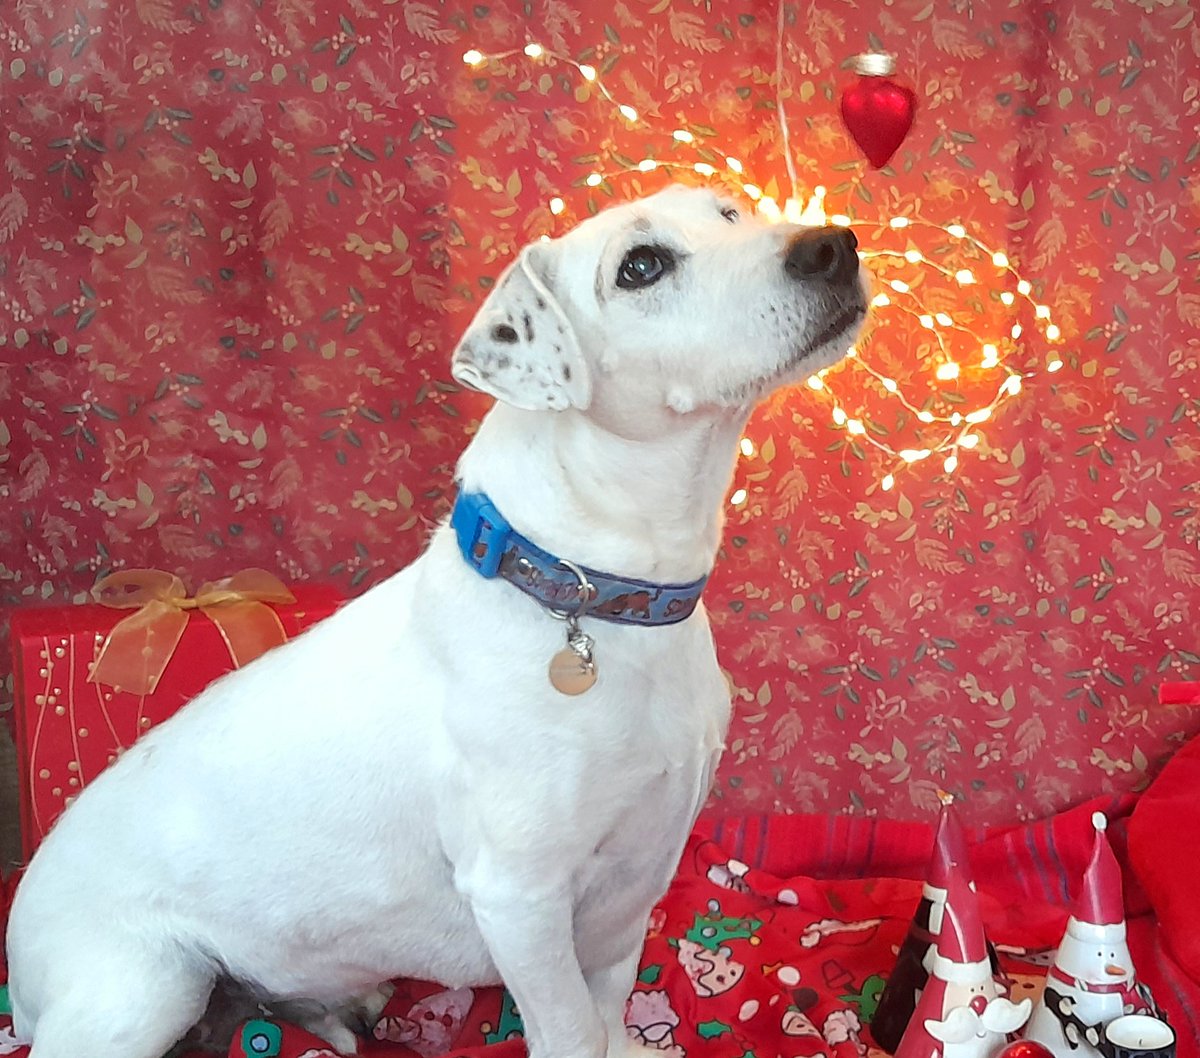 Scooby from Oldies Club is ready for Christmas – are you? 🎄 🎁 ☃️ bit.ly/477JAeD